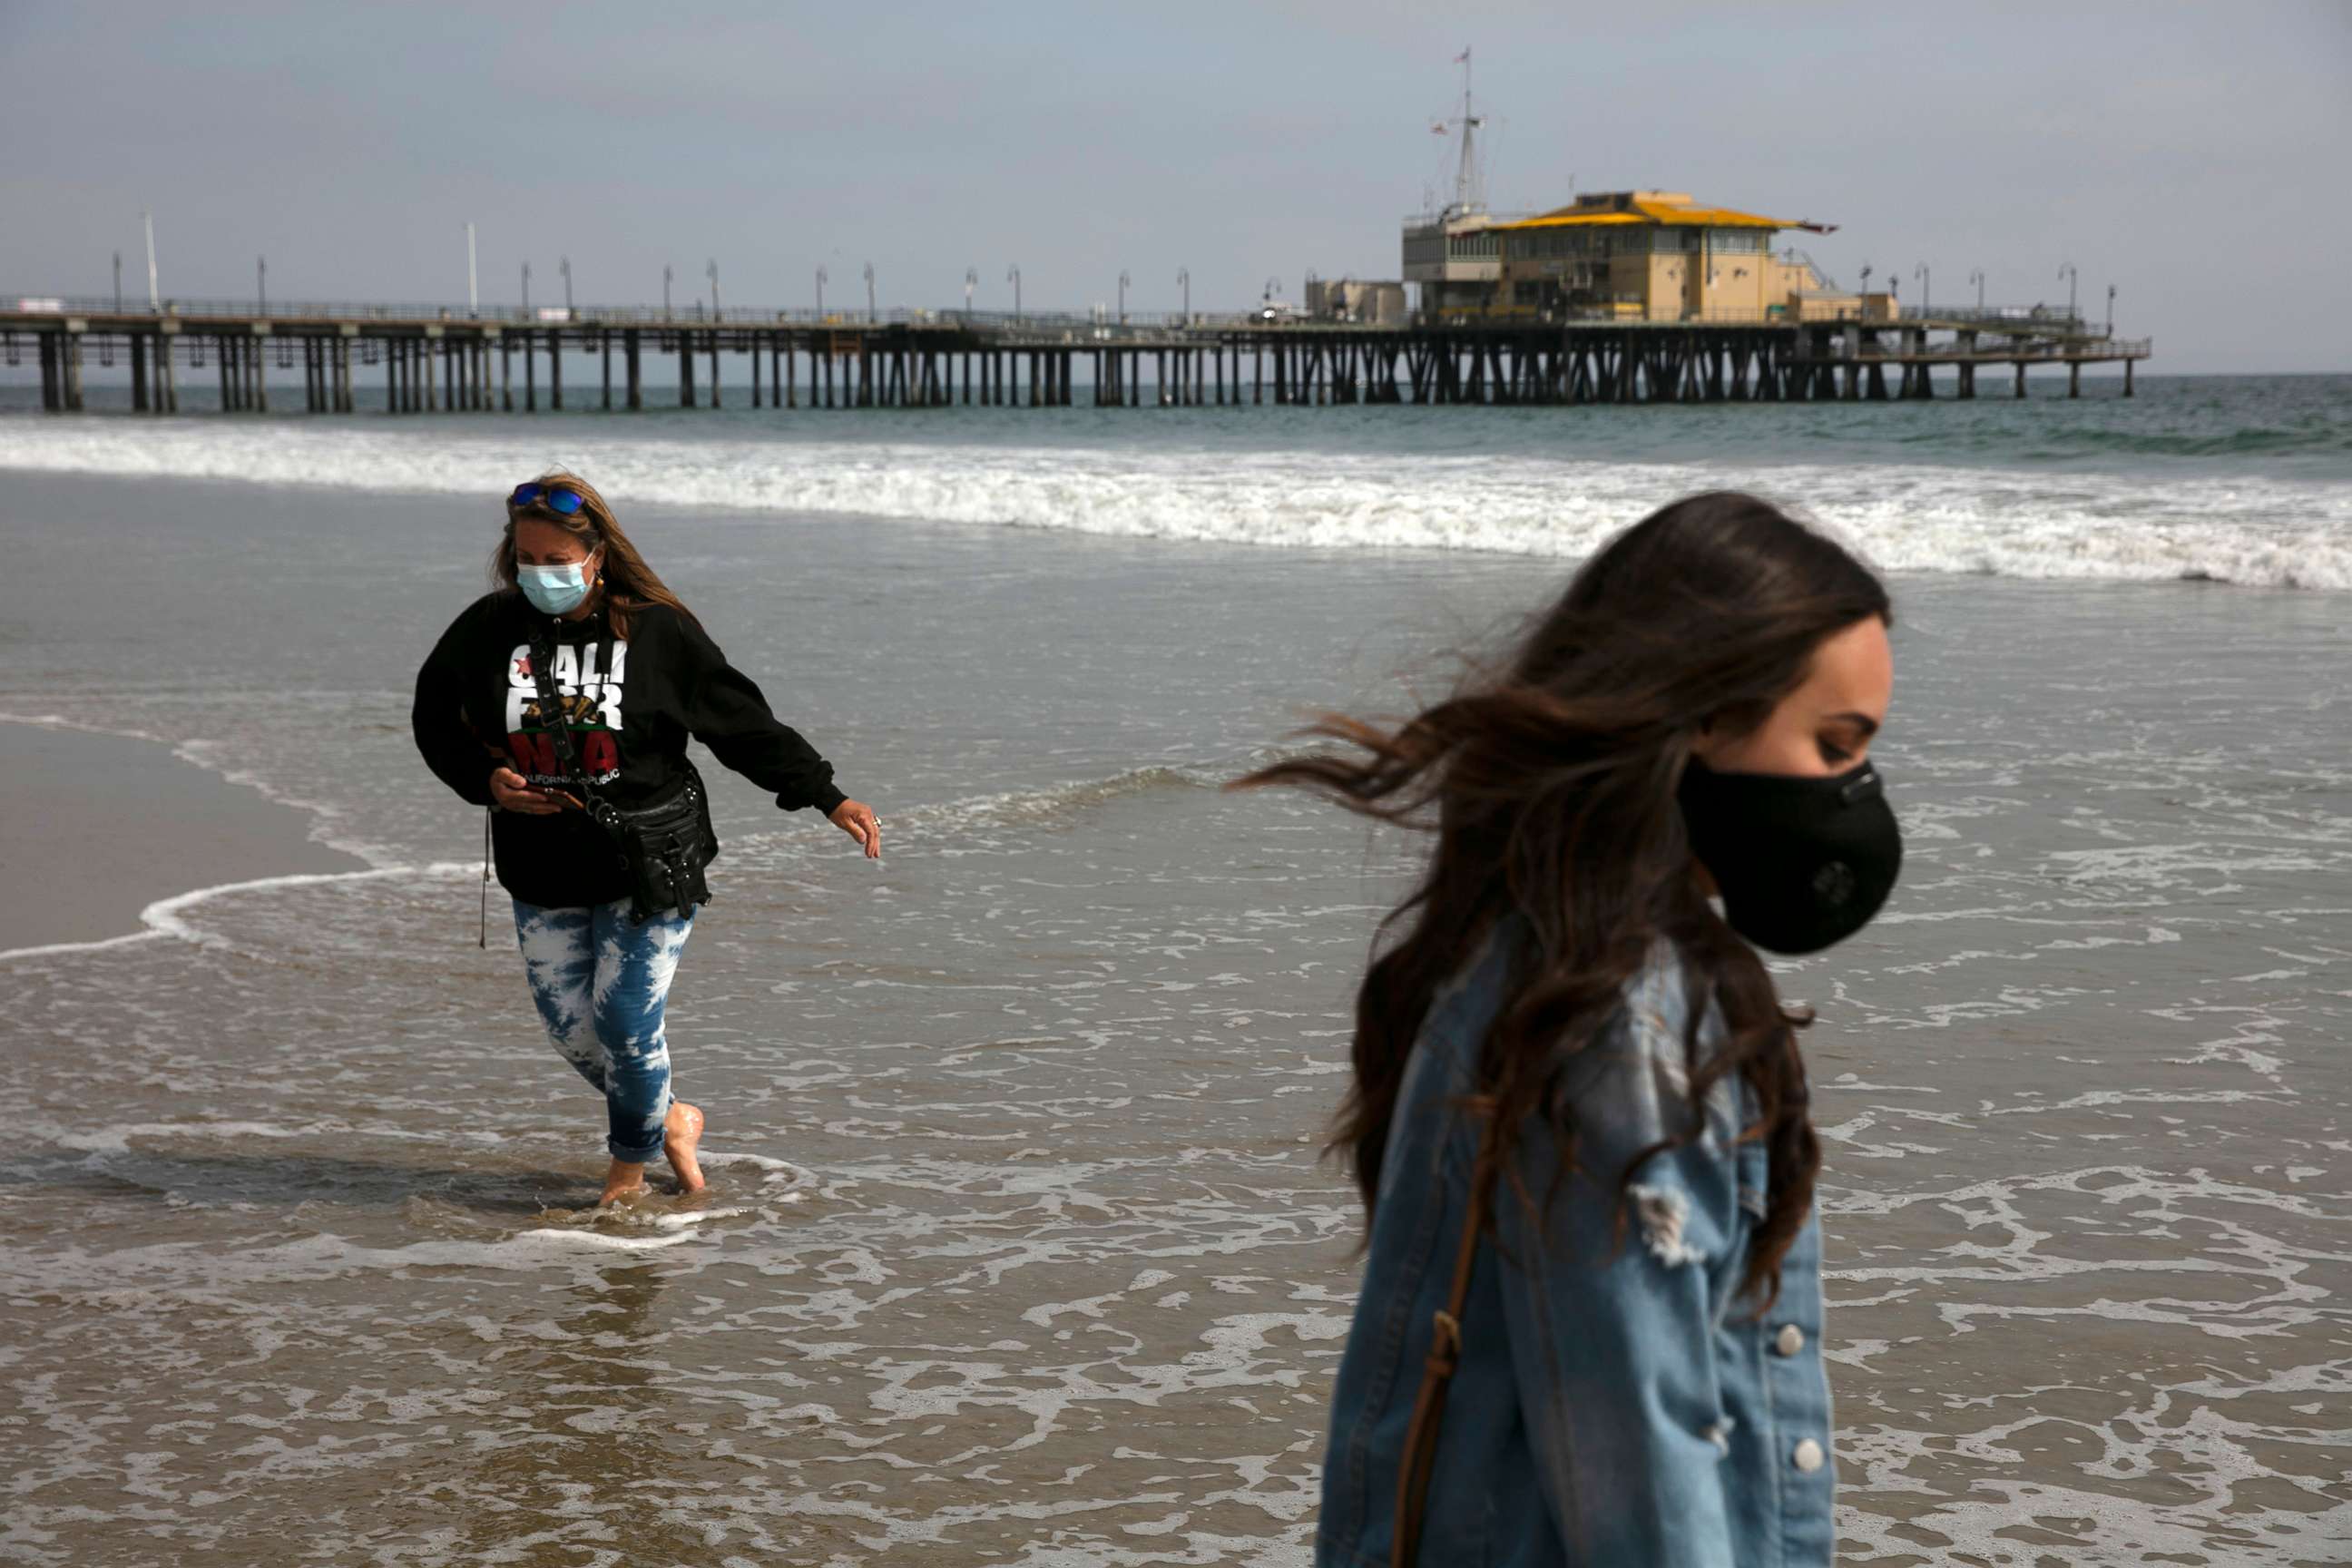 PHOTO: Malia Pena, foreground, and her mother, Lisa Torriente, wear masks as they visit the beach, June 23, 2020, in Santa Monica, Calif.